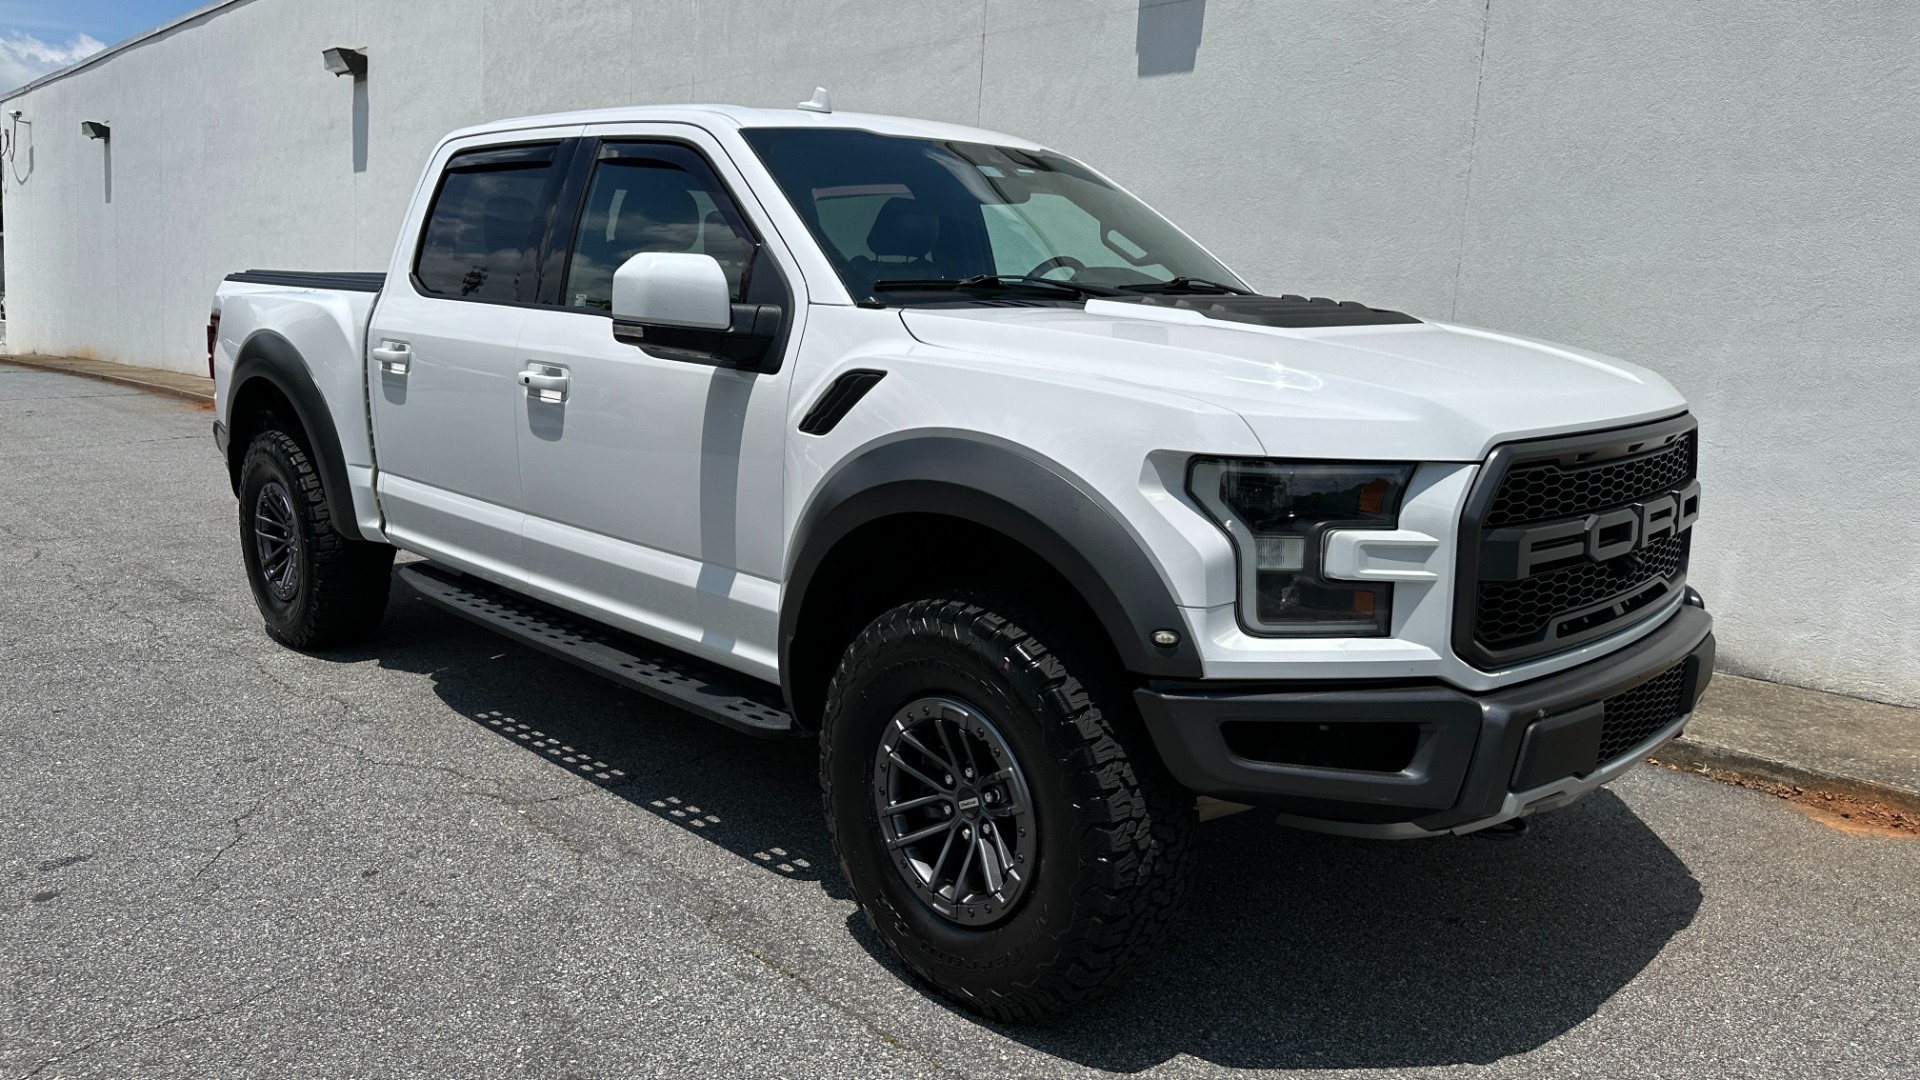 Used 2020 Ford F-150 RAPTOR / HIGH OUTPUT / PANORAMIC ROOF / 17IN FORGED WHEELS for sale $59,995 at Formula Imports in Charlotte NC 28227 5